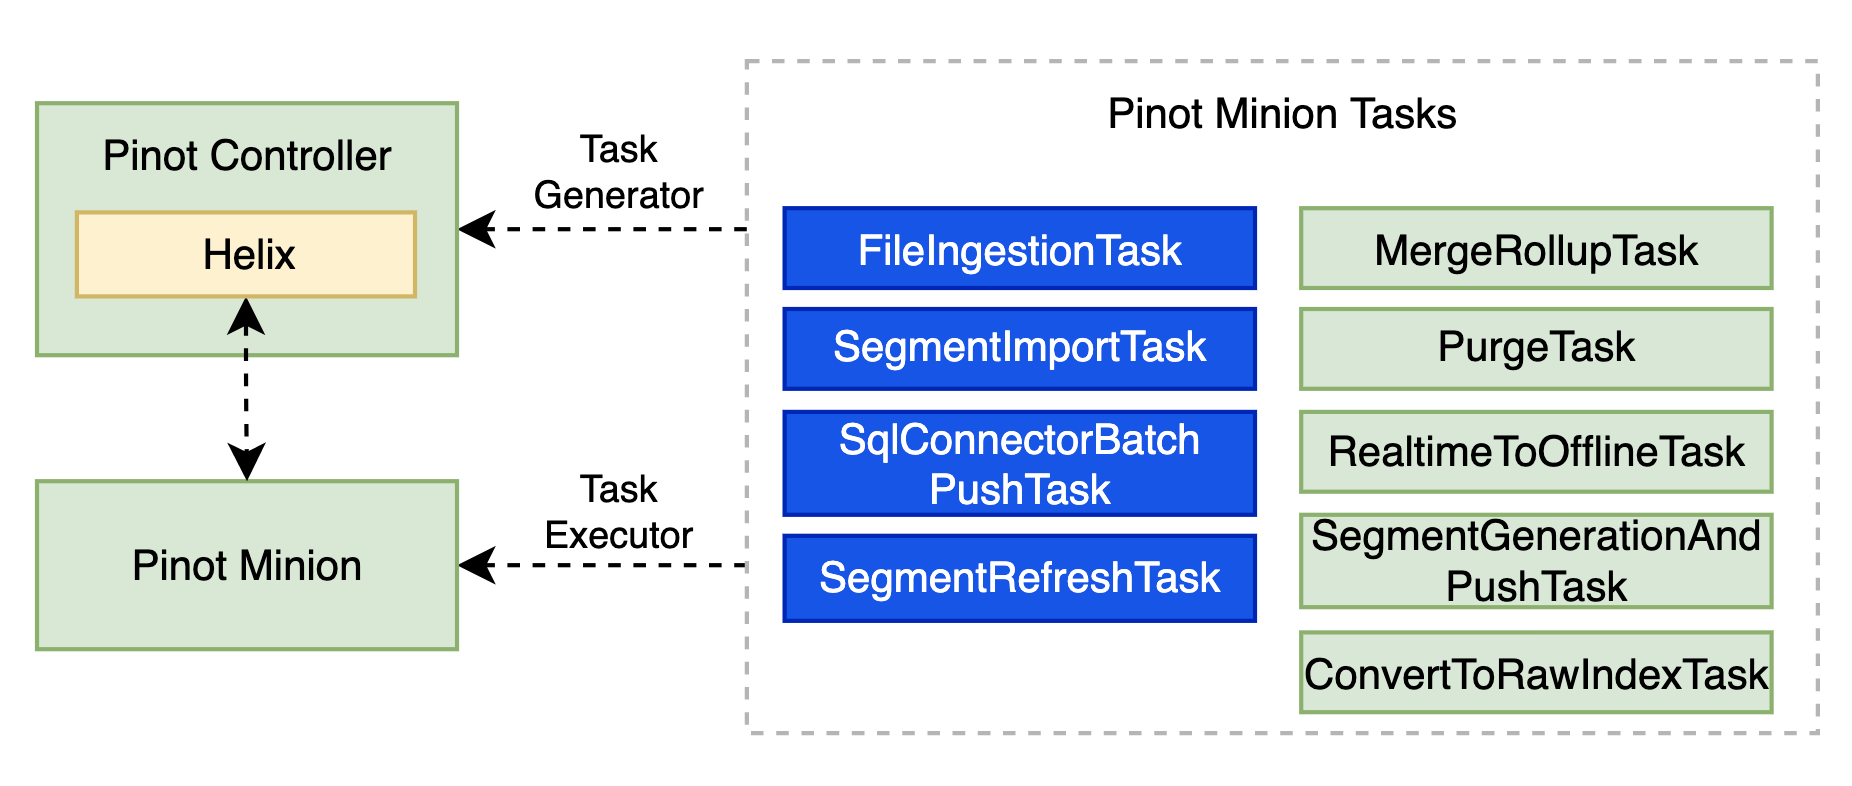 Additional Apache Pinot Minion tasks available in StarTree Cloud